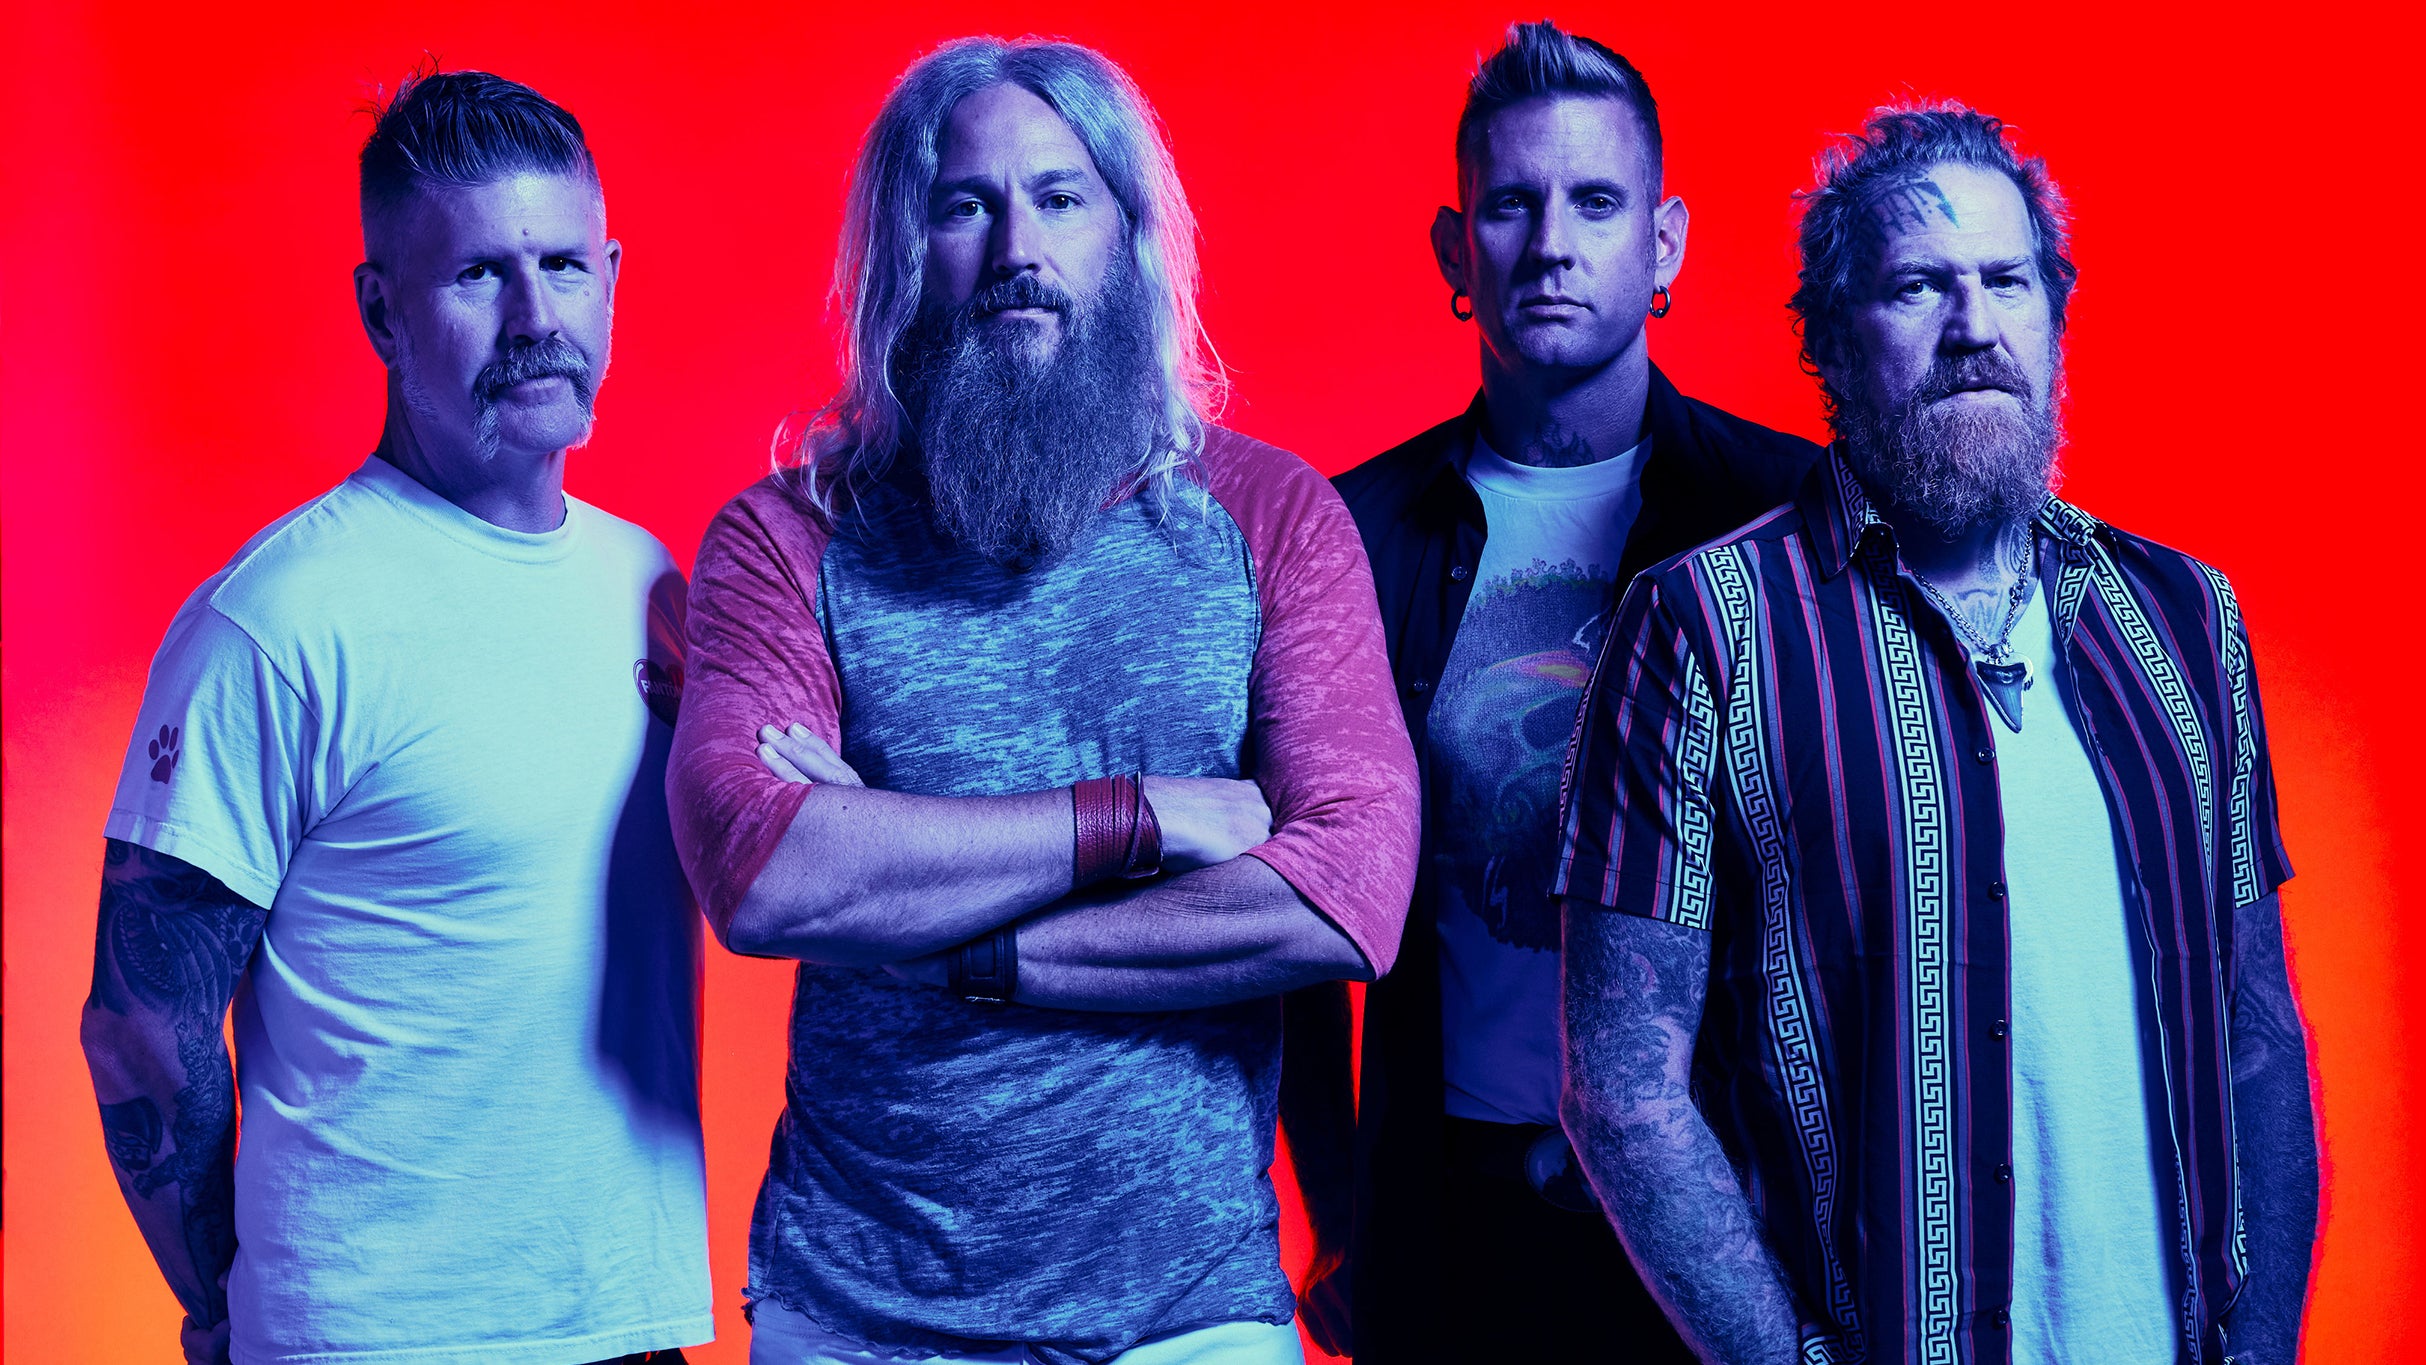 Mastodon & Lamb of God: ASHES OF LEVIATHAN TOUR free presale passcode for early tickets in Alpharetta